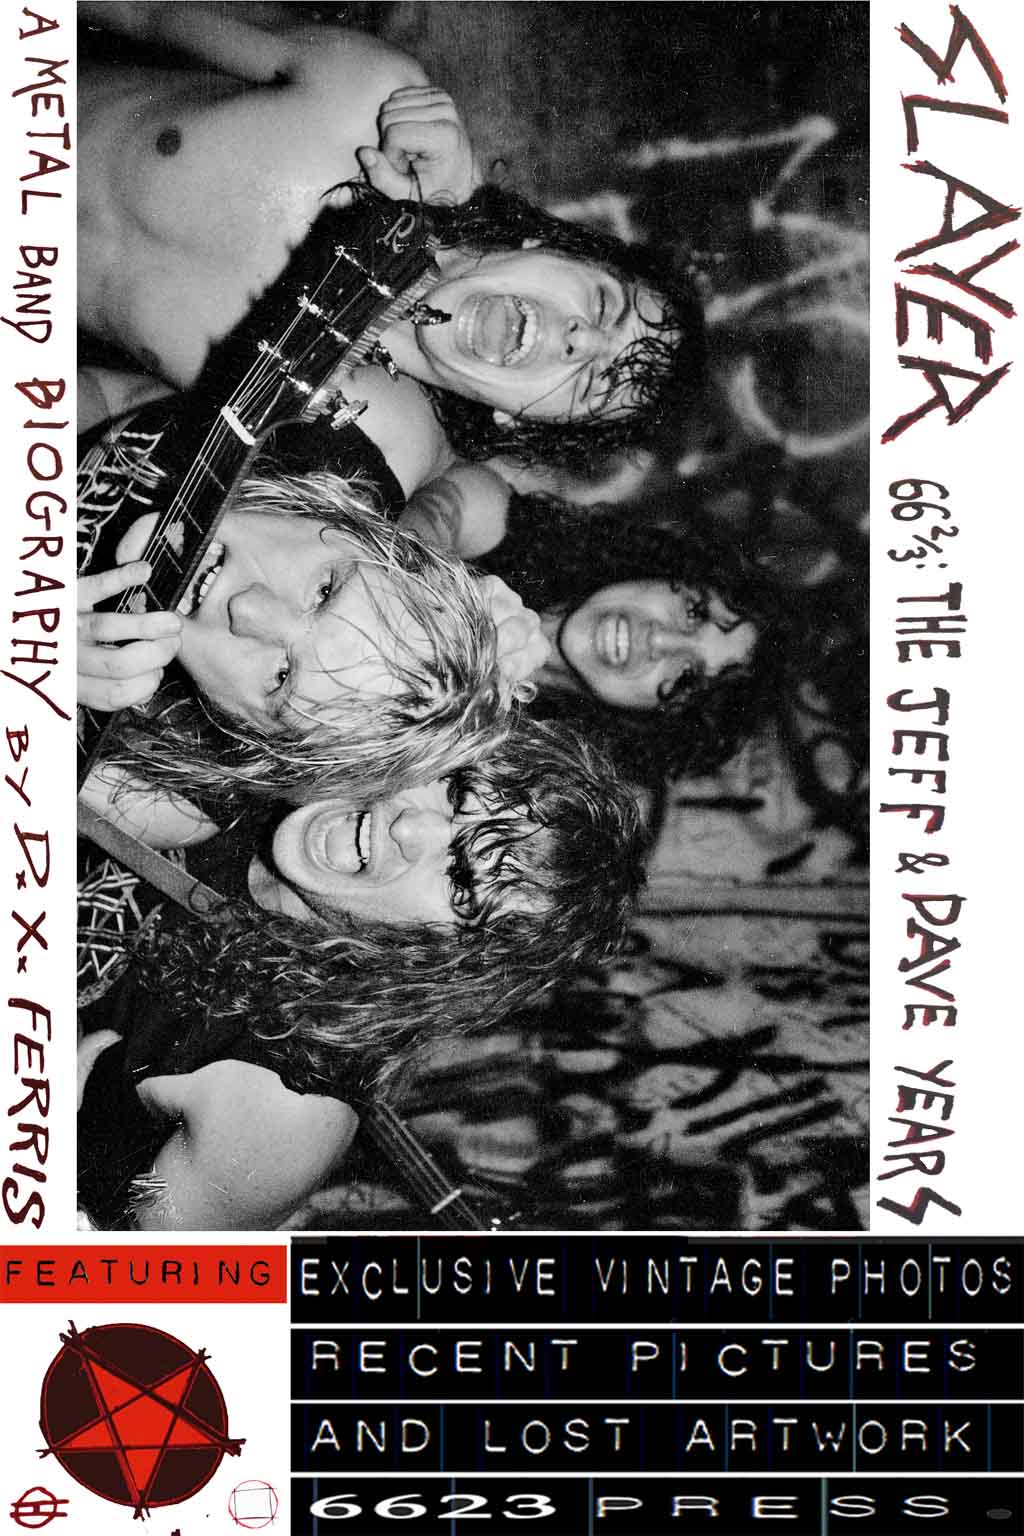 Slayer 66 2/3: The Jeff & Dave Years. A Metal Band Biography by D.X. Ferris